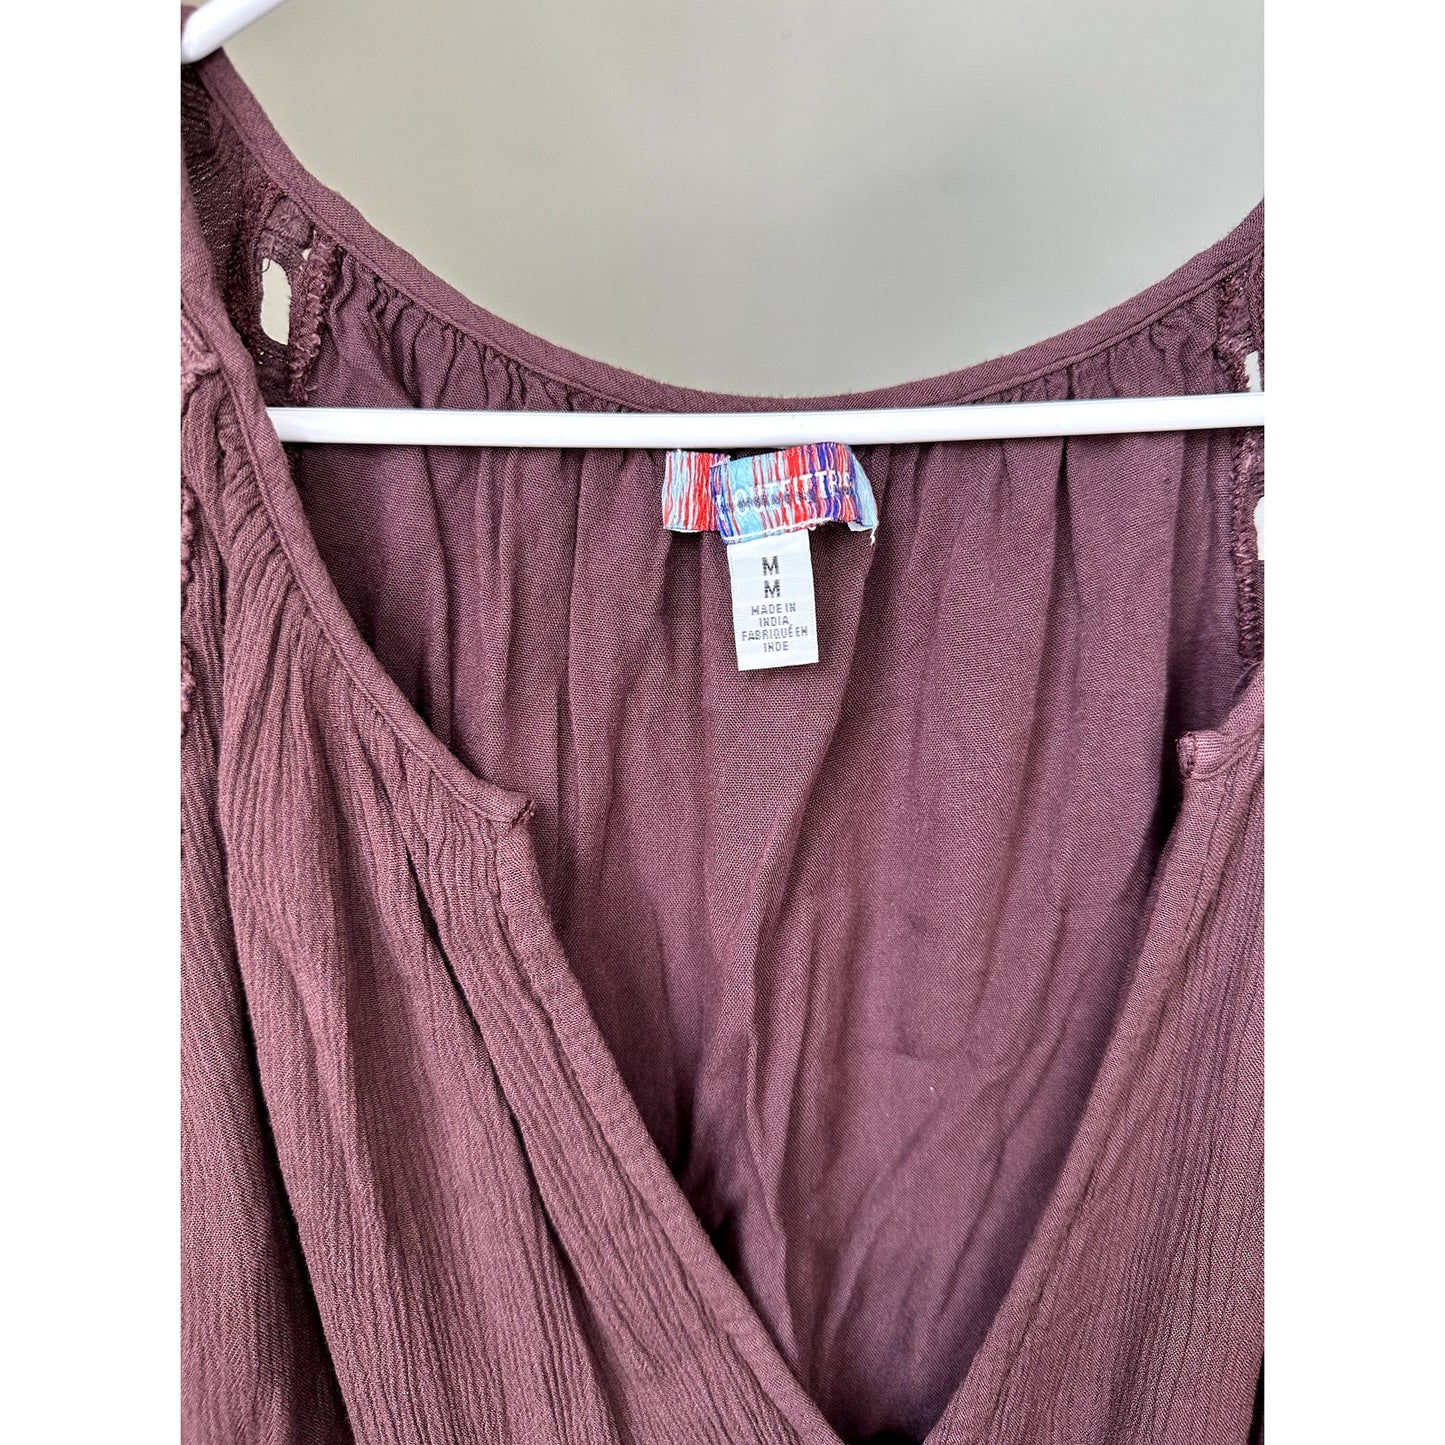 Urban Outfitters Romper, Size M